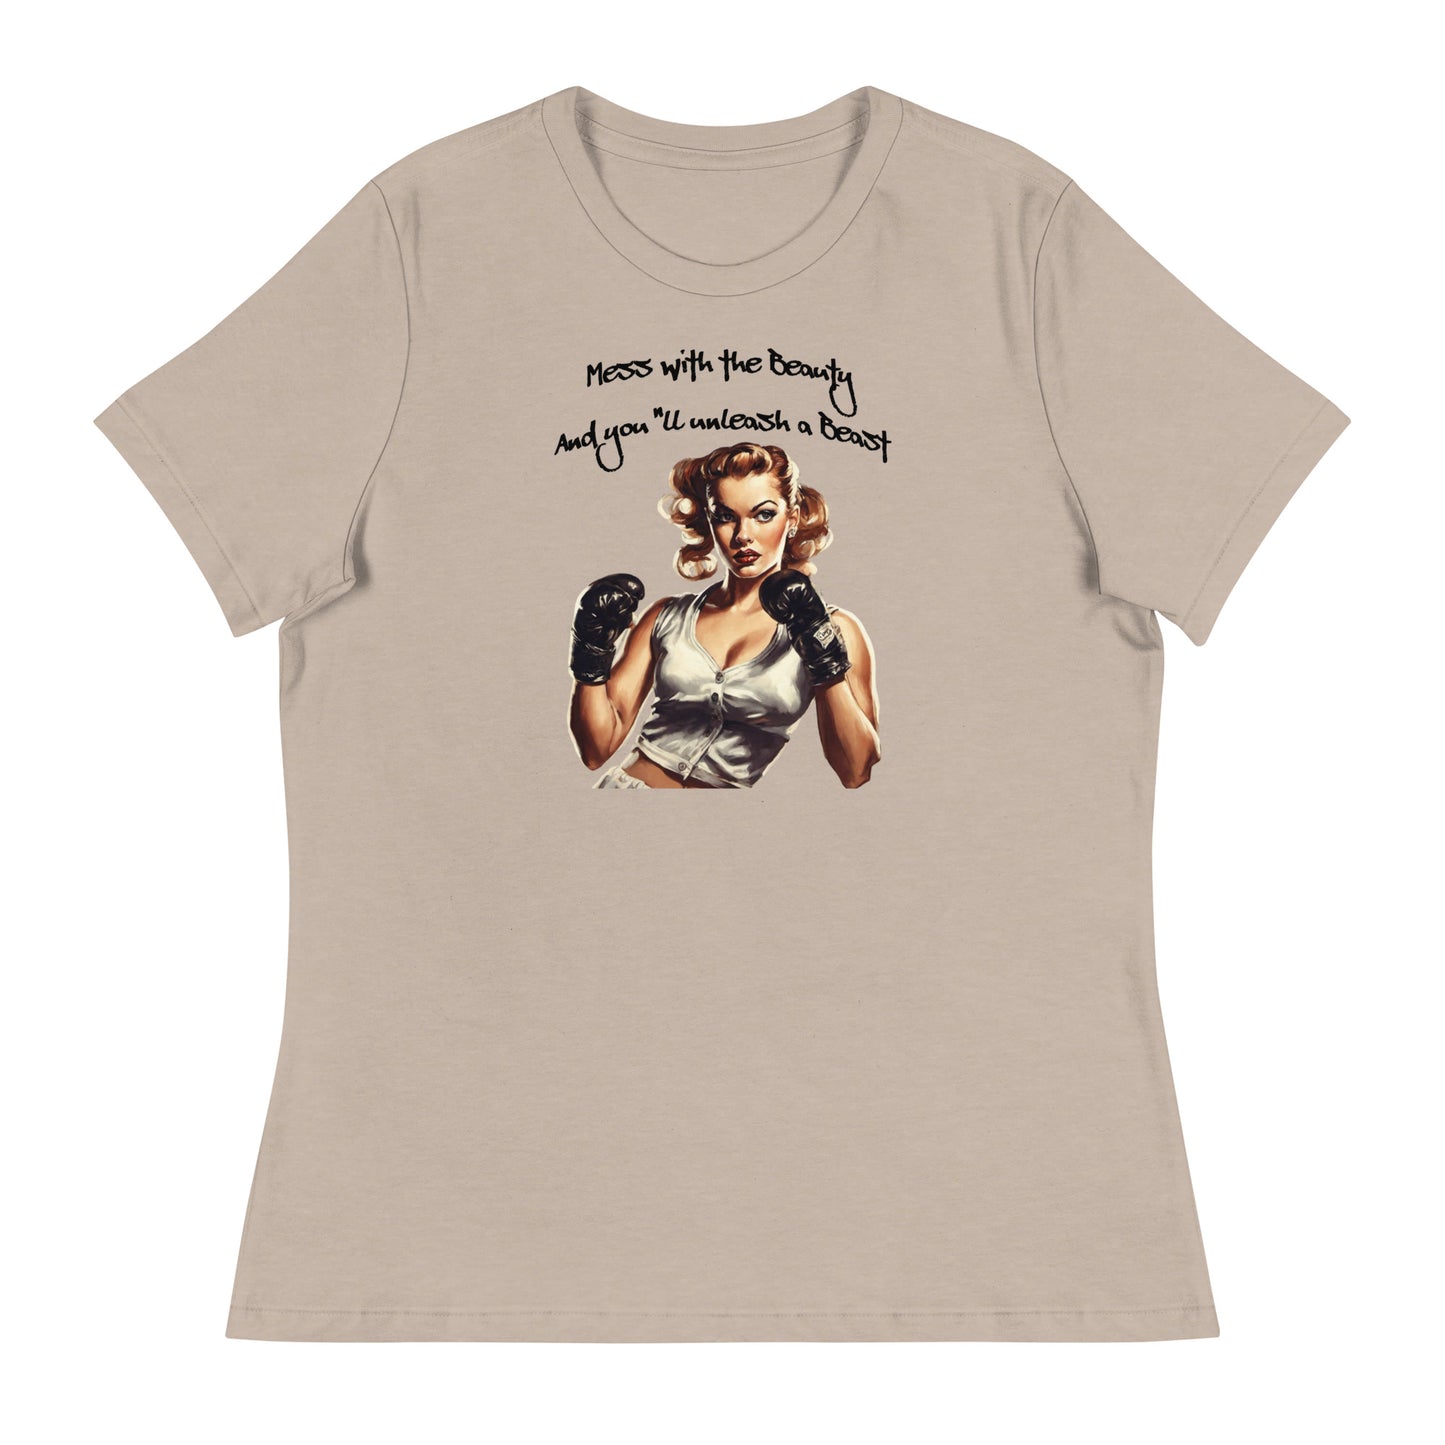 Mess with the Beauty, Unleash the Beast Women's Strength T-Shirt Heather Stone